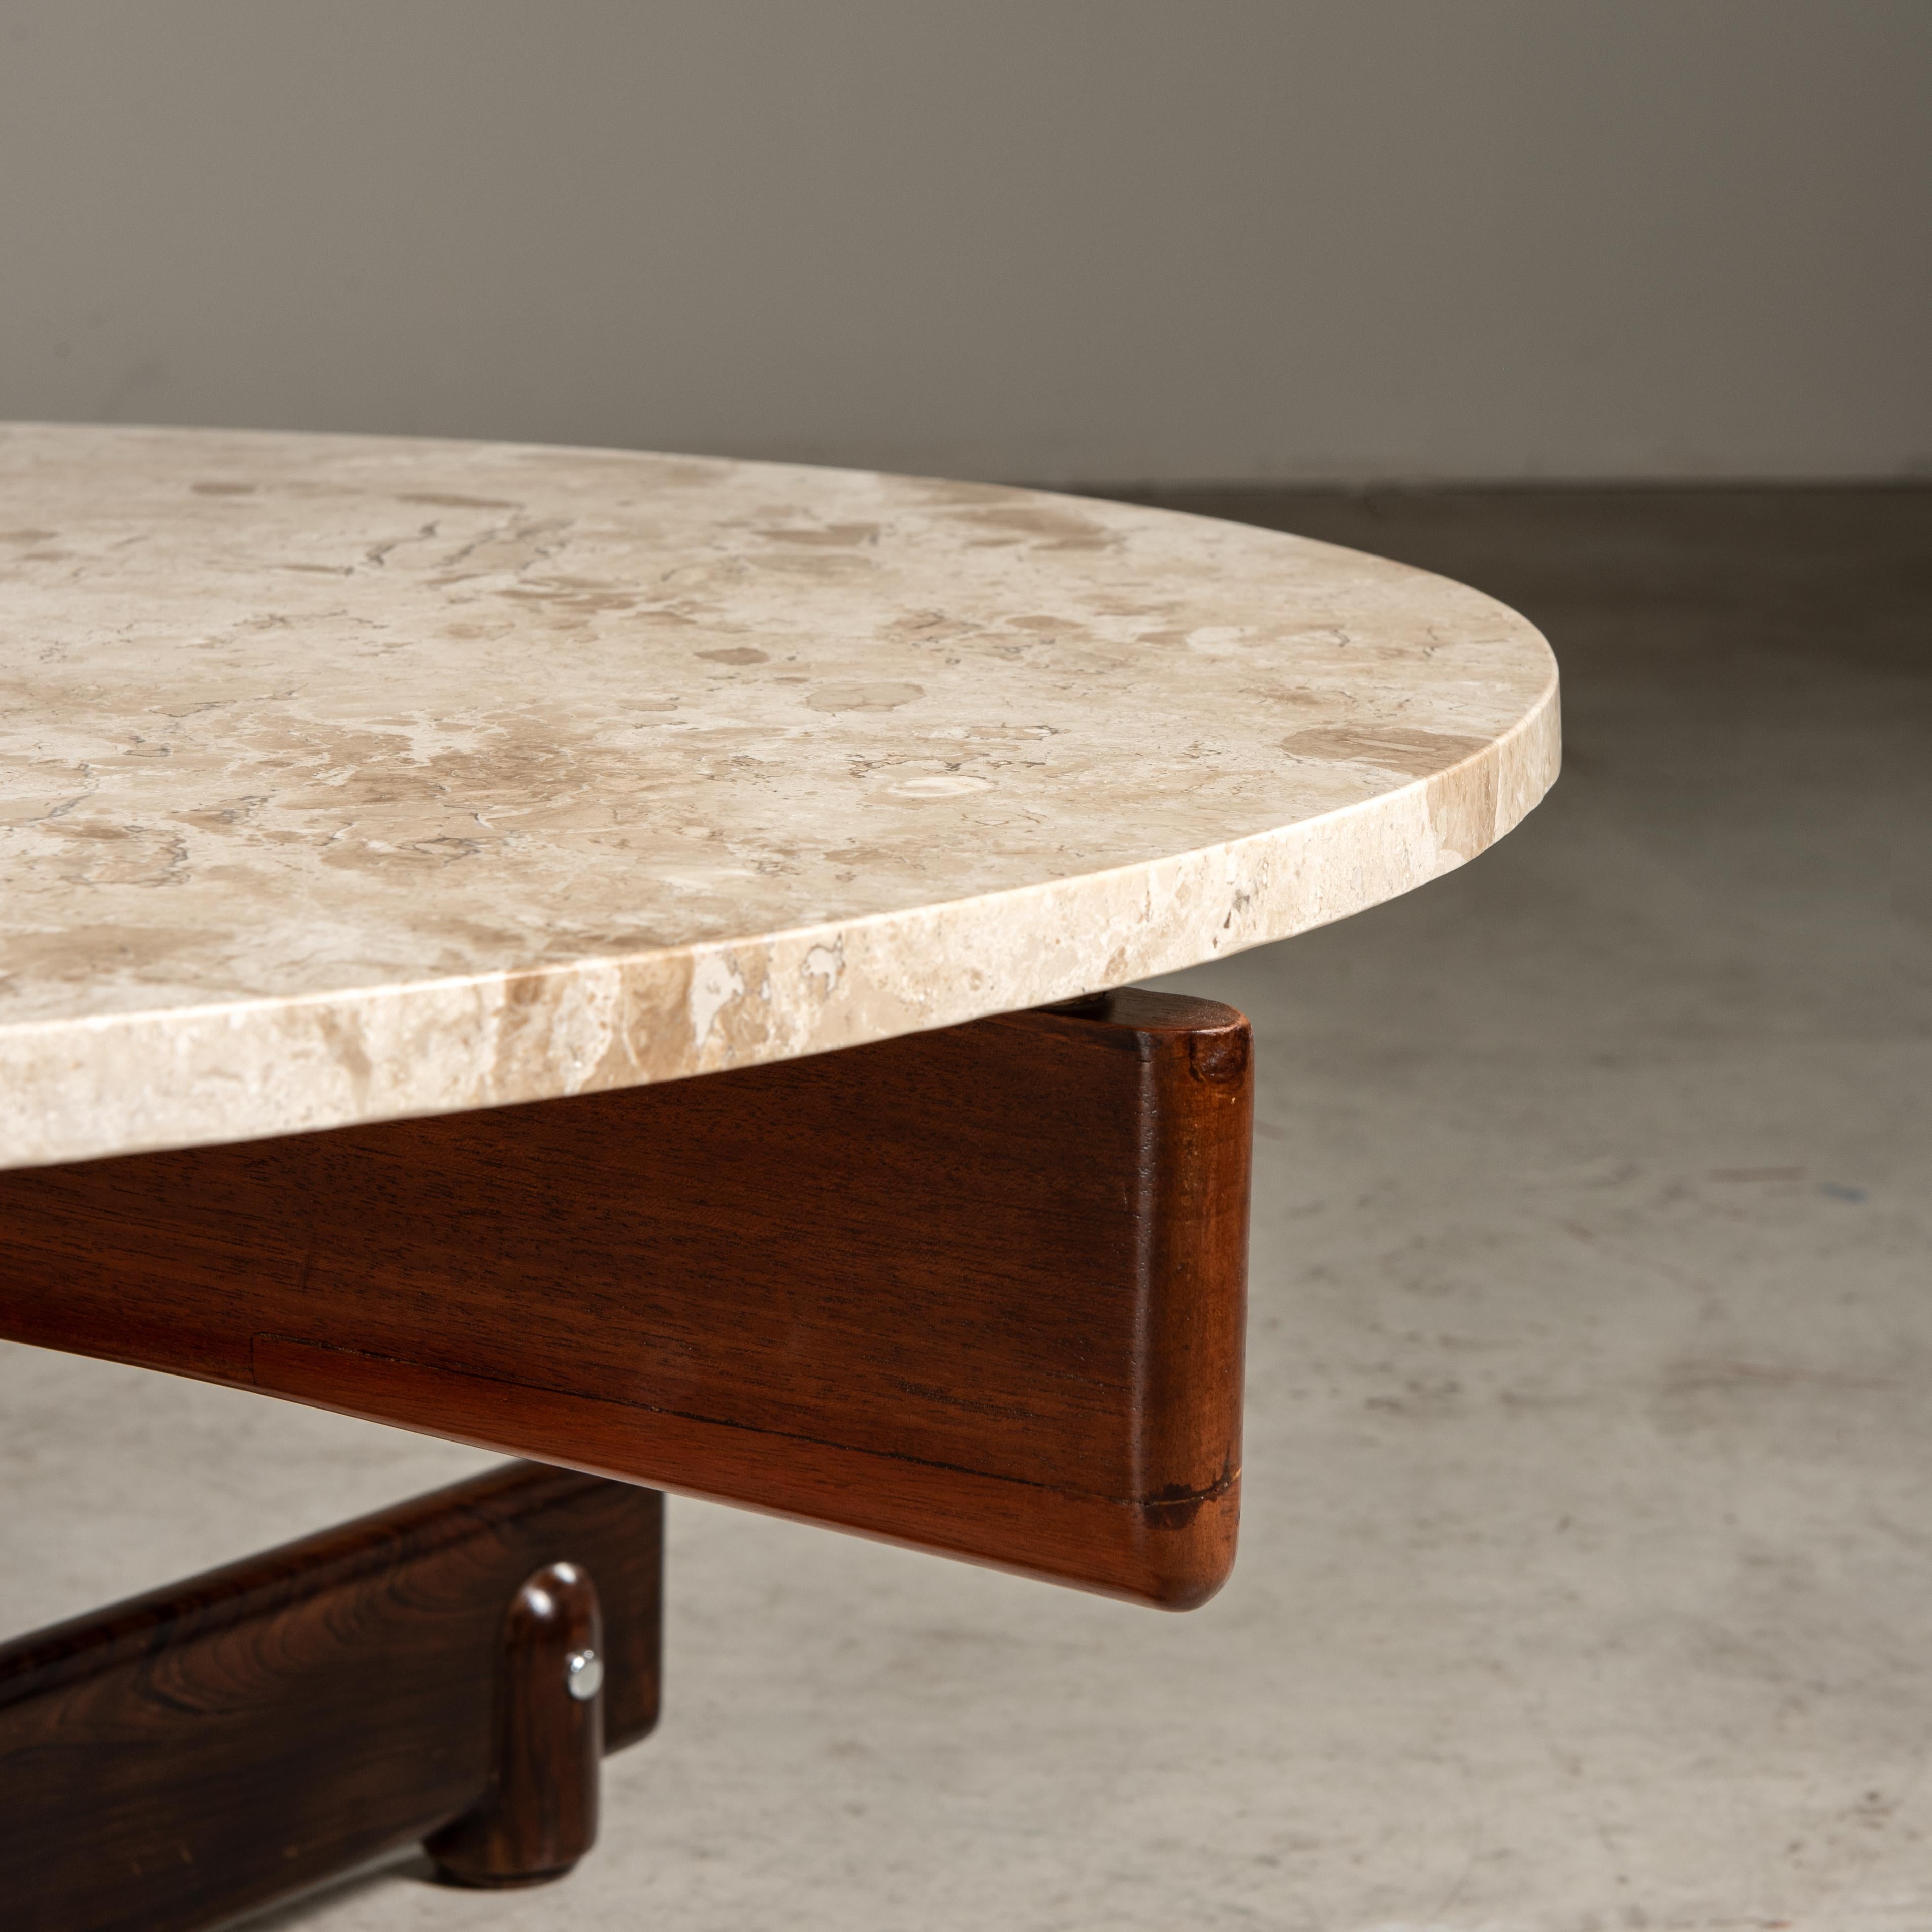 20th Century 'Alex' Coffee Table in Marble and Wood, Sergio Rodrigues, Brazilian Mid-Century For Sale